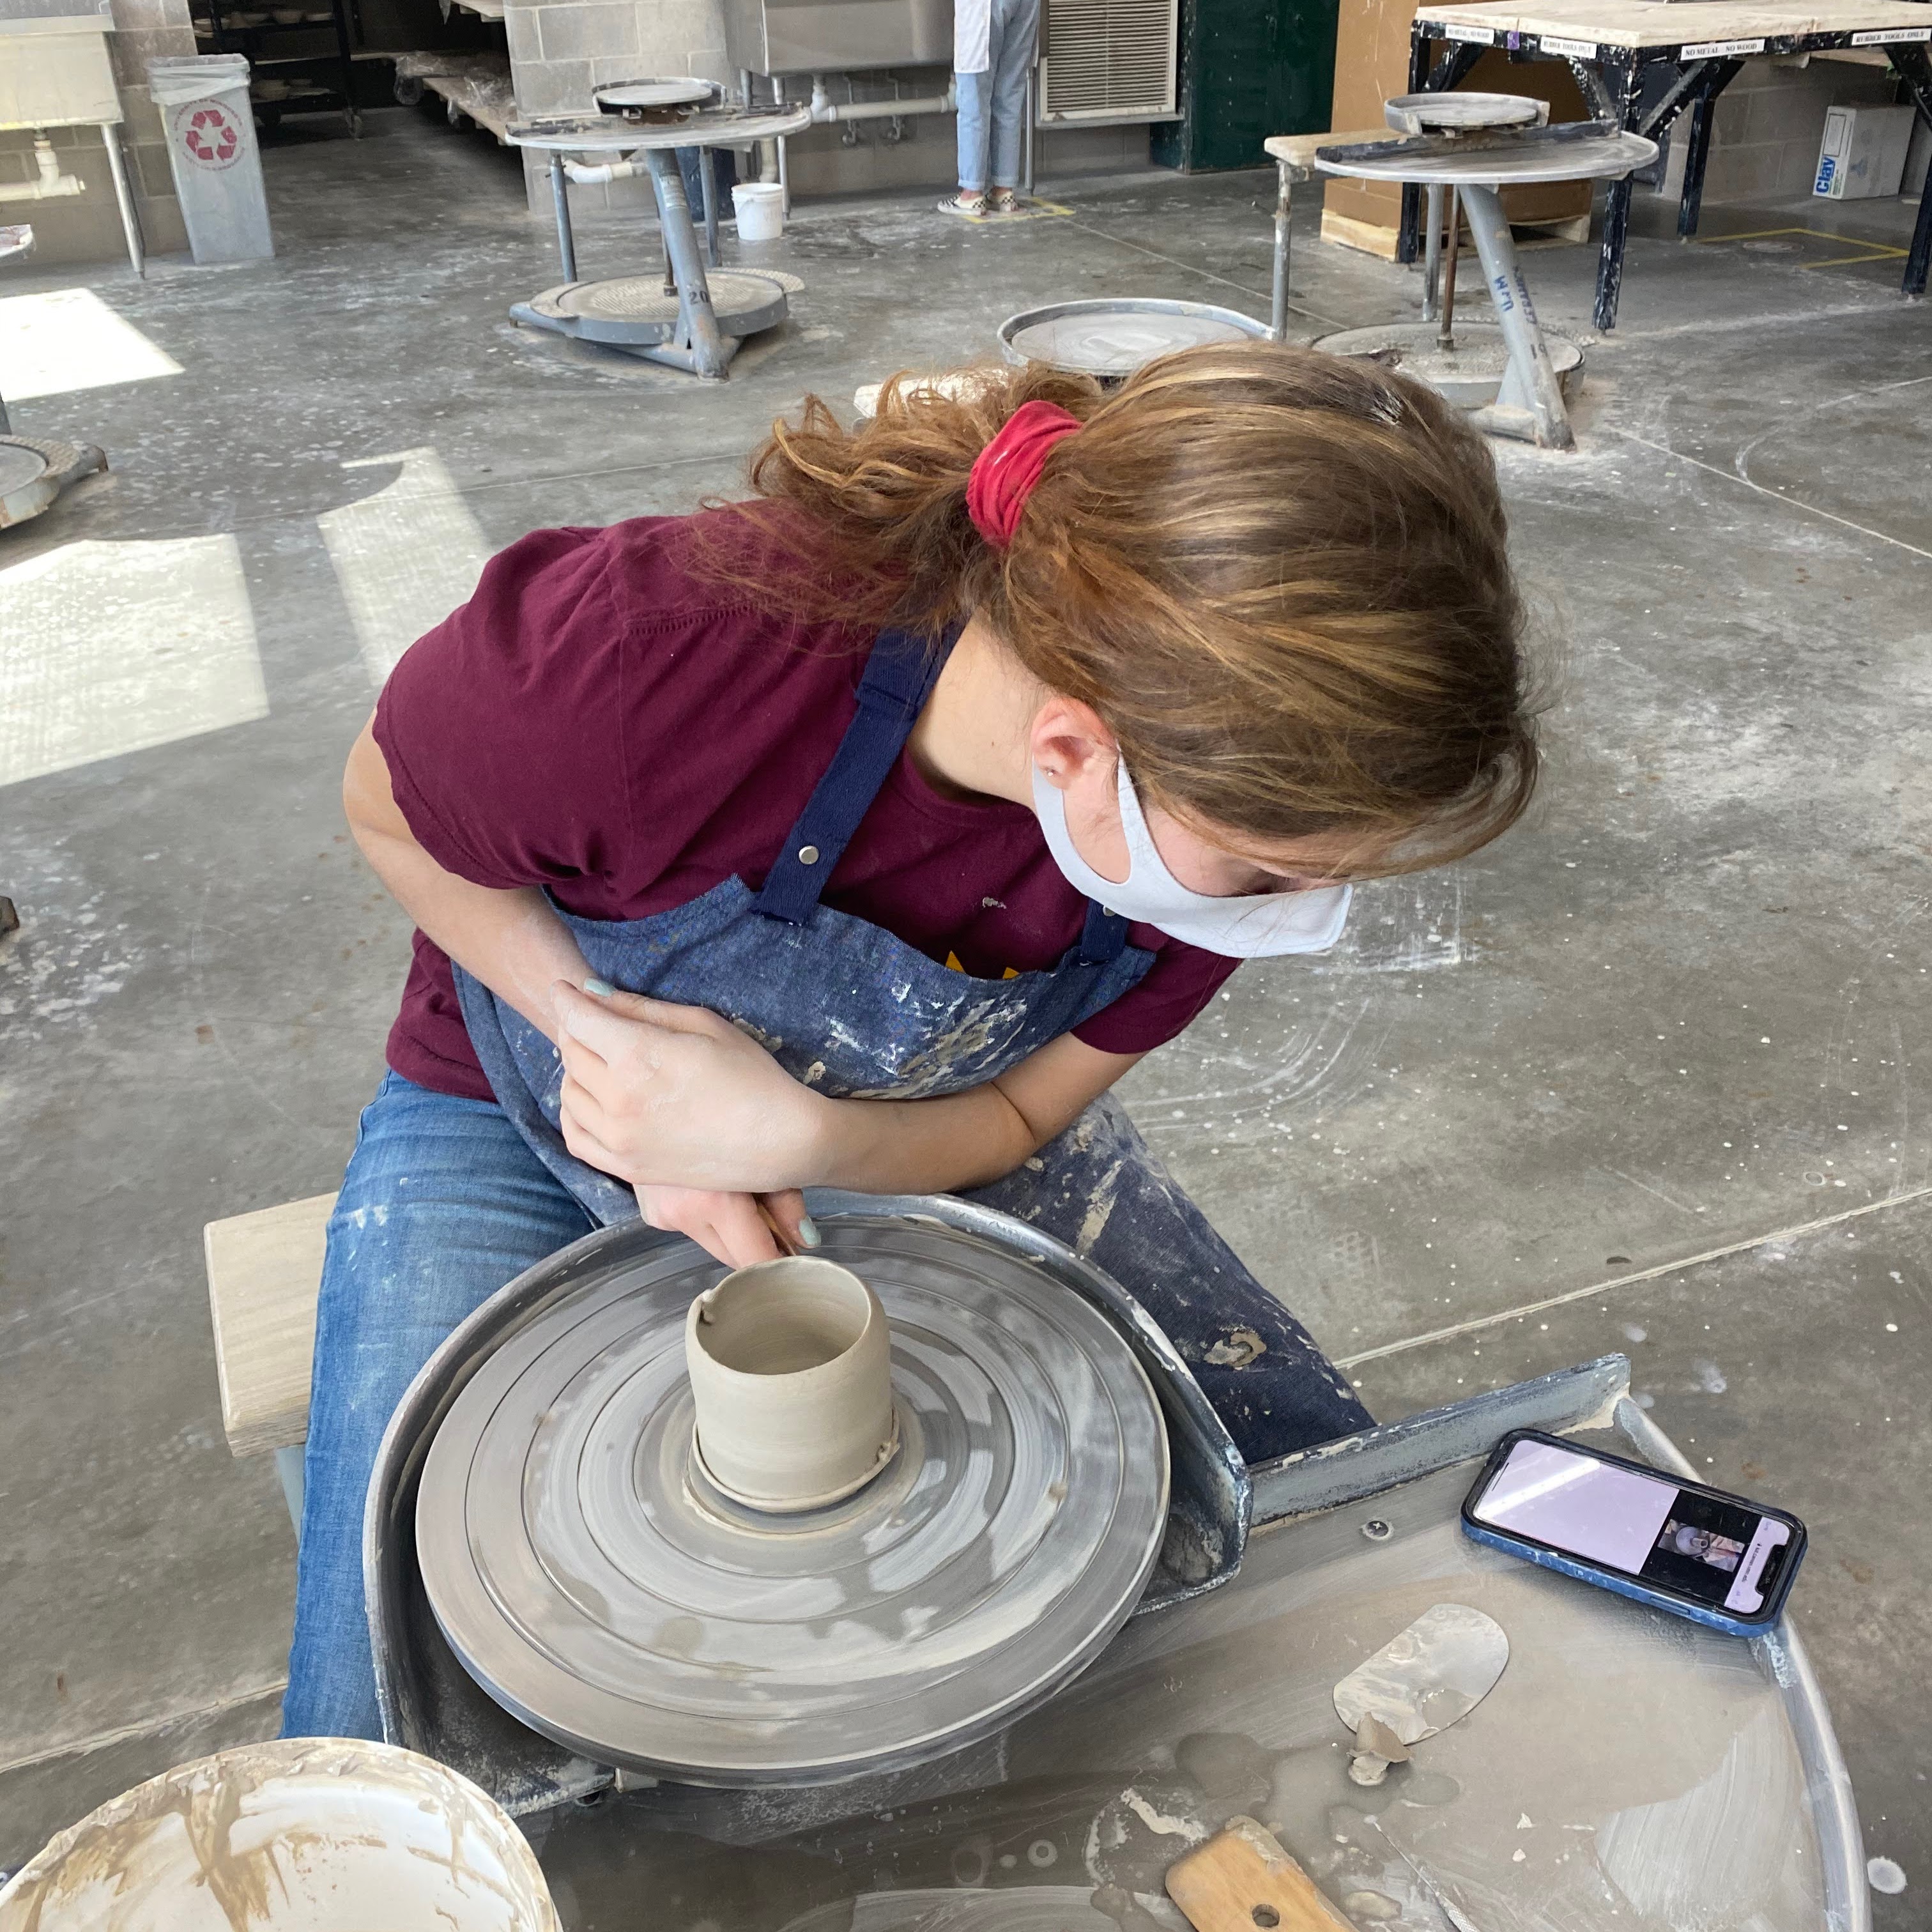 Student at ceramics wheel watching video demo on their phone